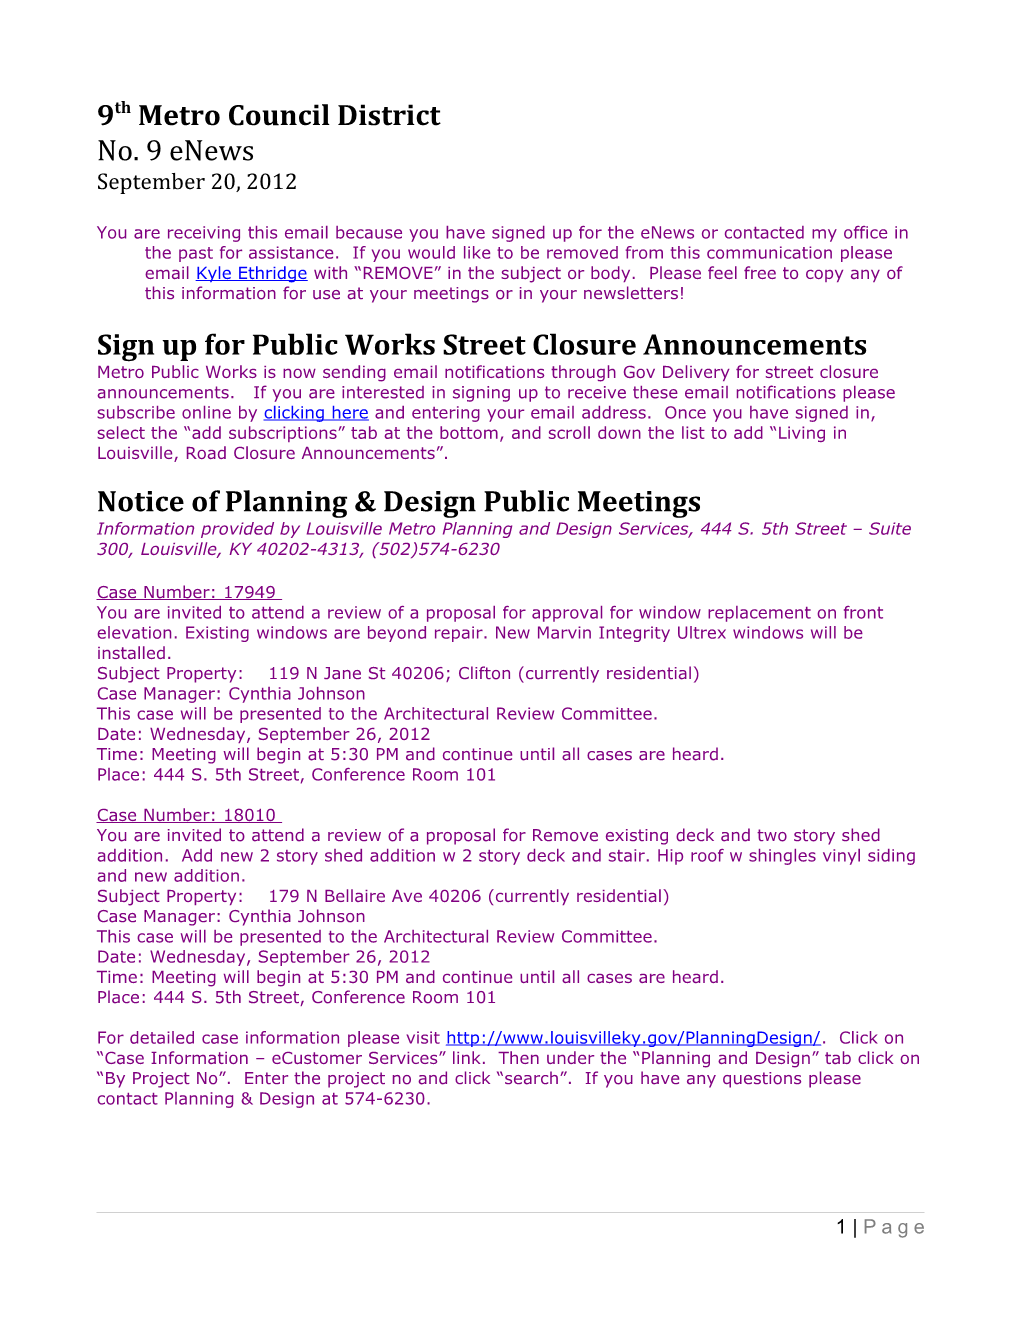 Sign up for Public Works Street Closure Announcements